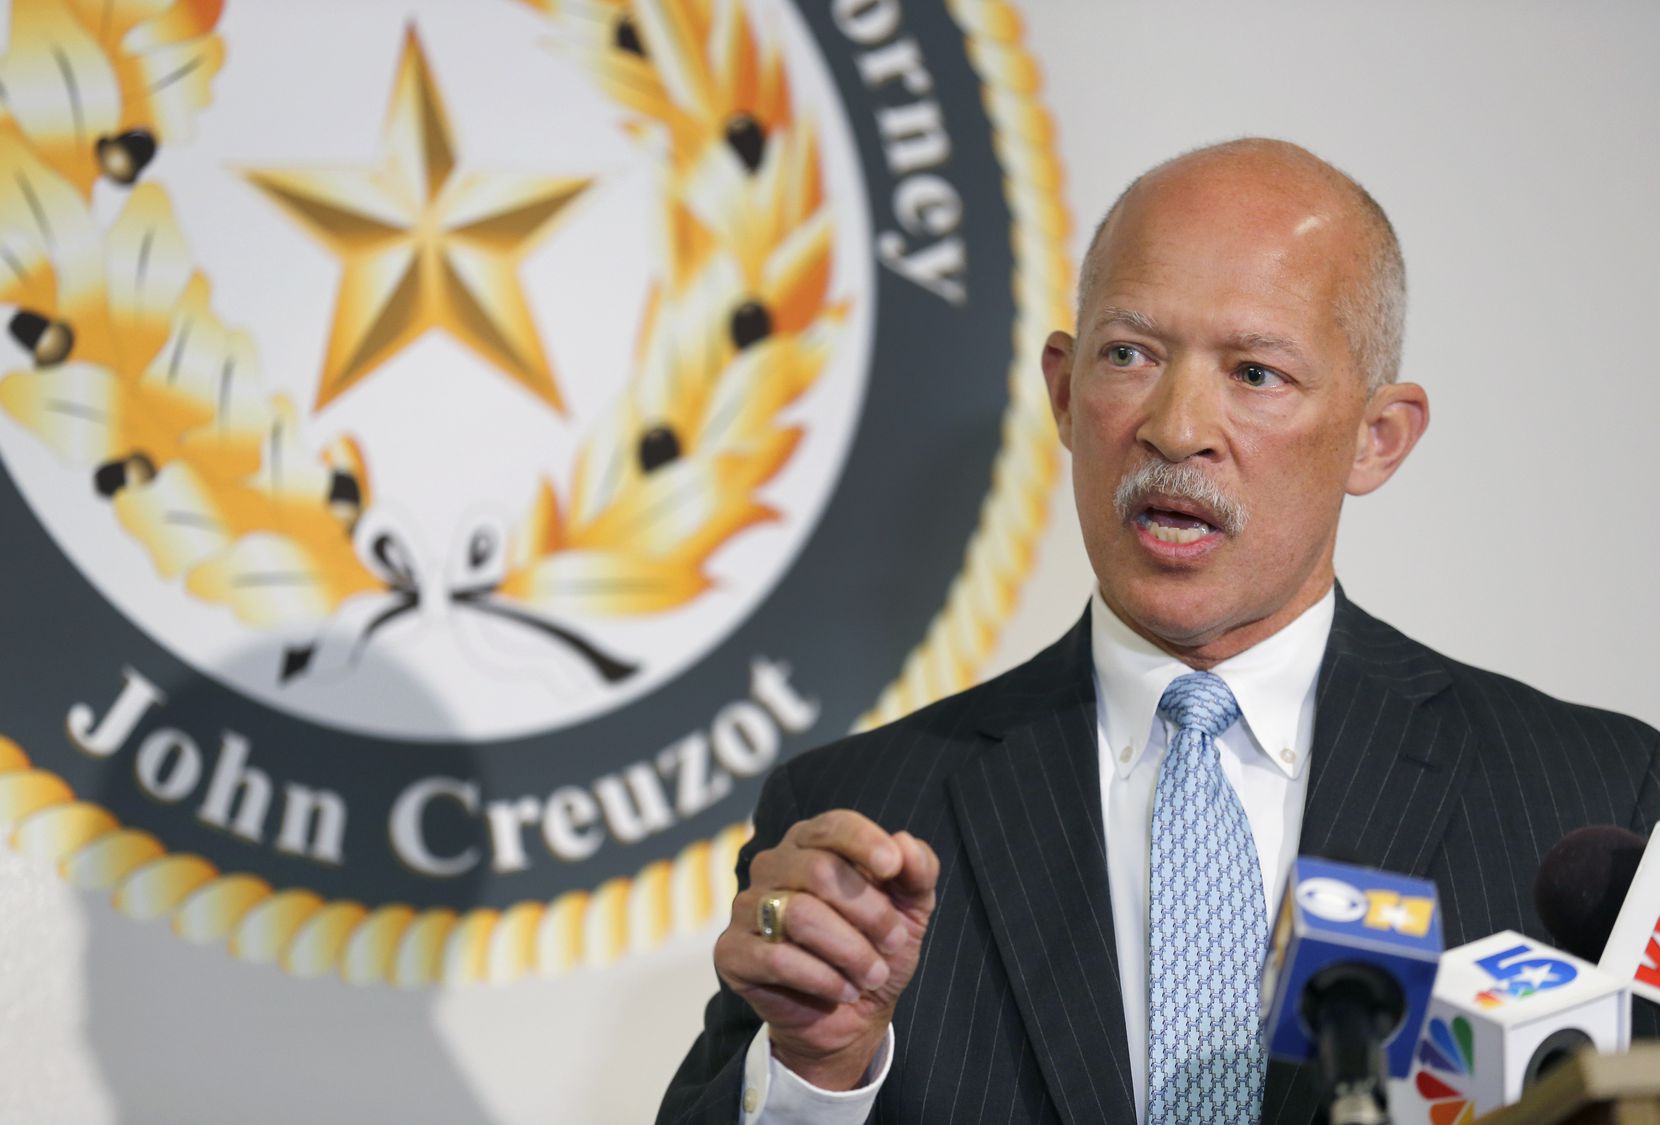 Dallas County District Attorney John Creuzot has declined to file misdemeanor possession of...